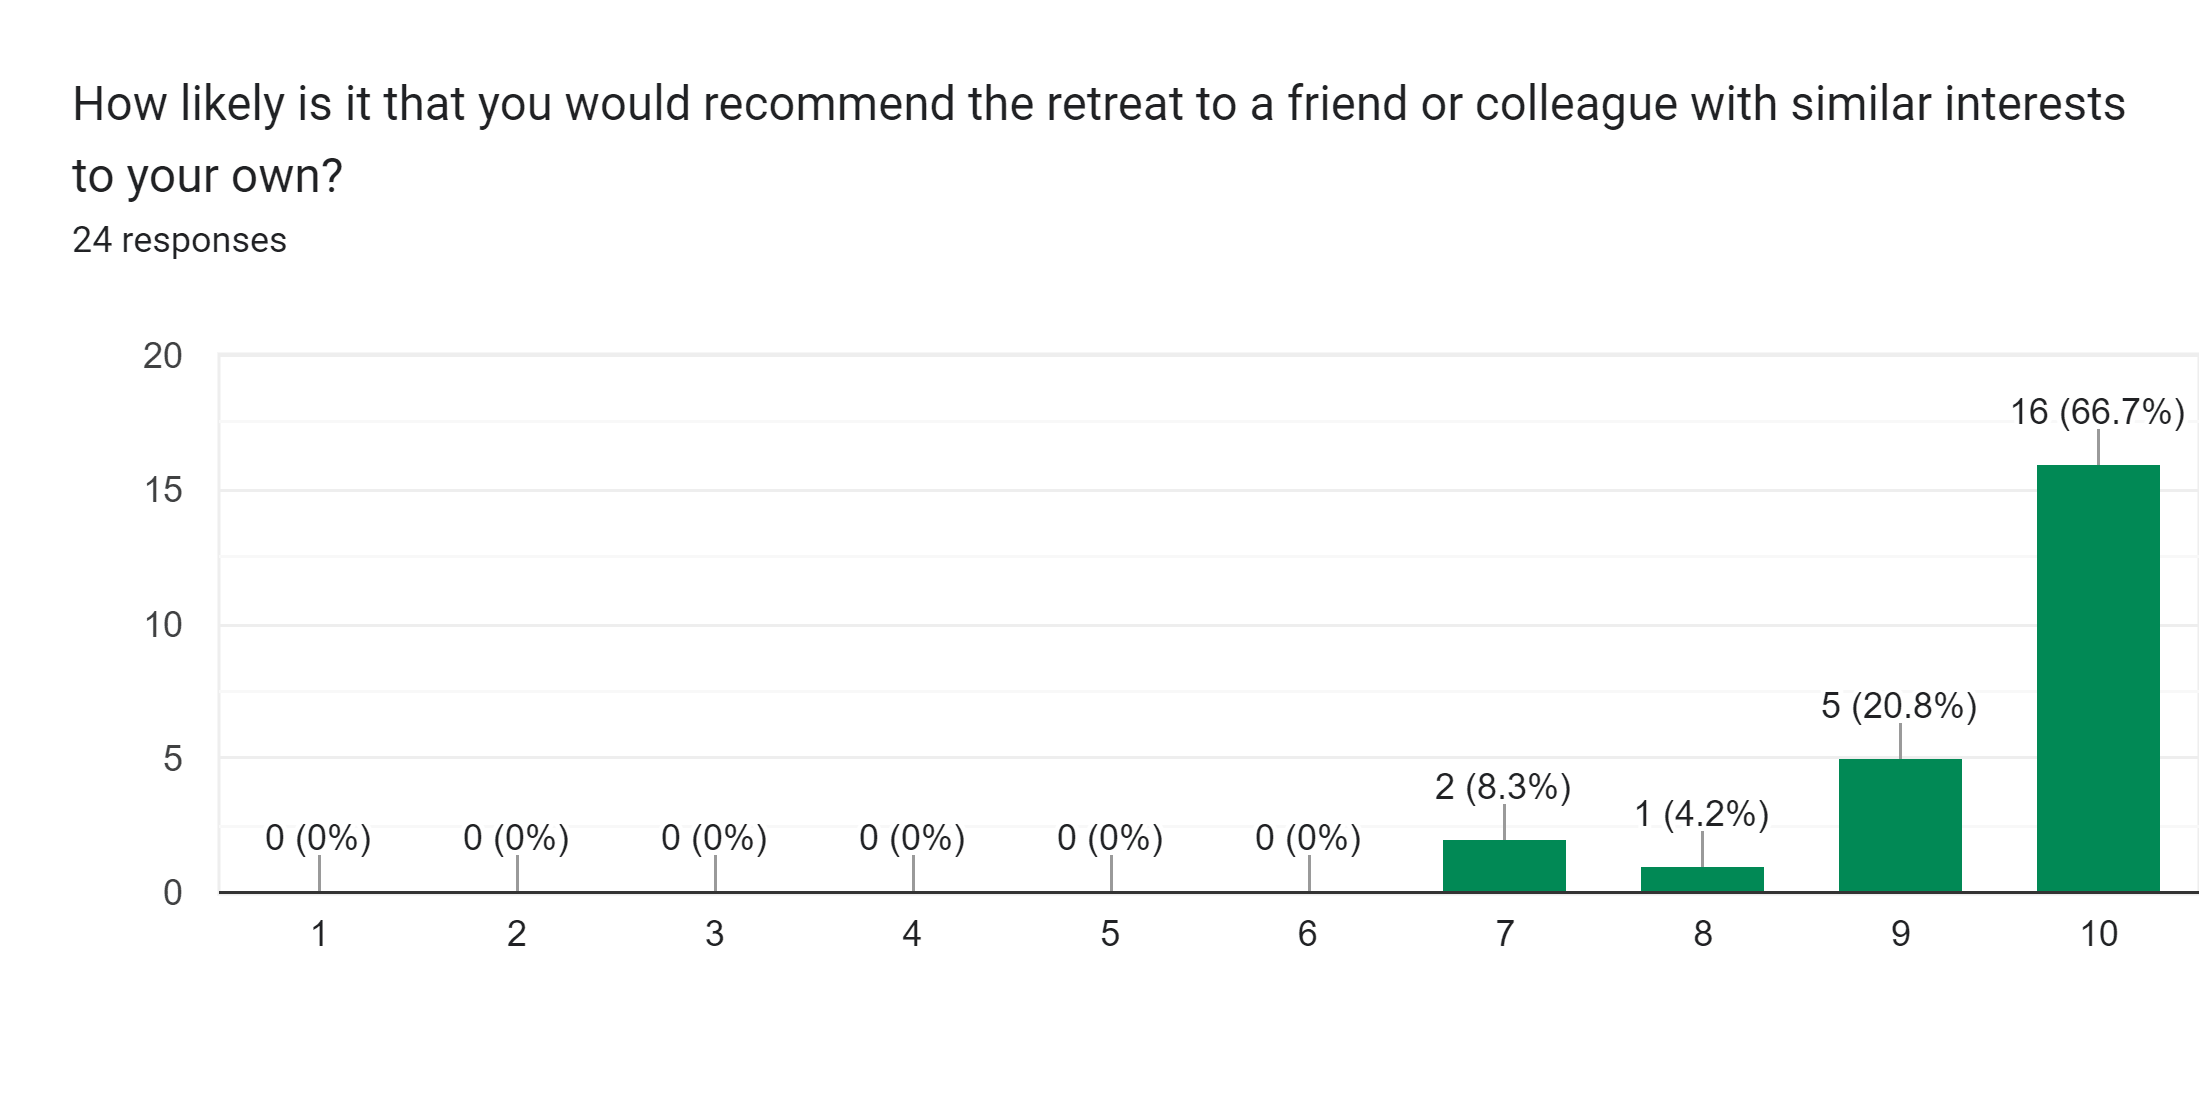 Forms response chart. Question title: How likely is it that you would recommend the retreat to a friend or colleague with similar interests to your own?. Number of responses: 24 responses.